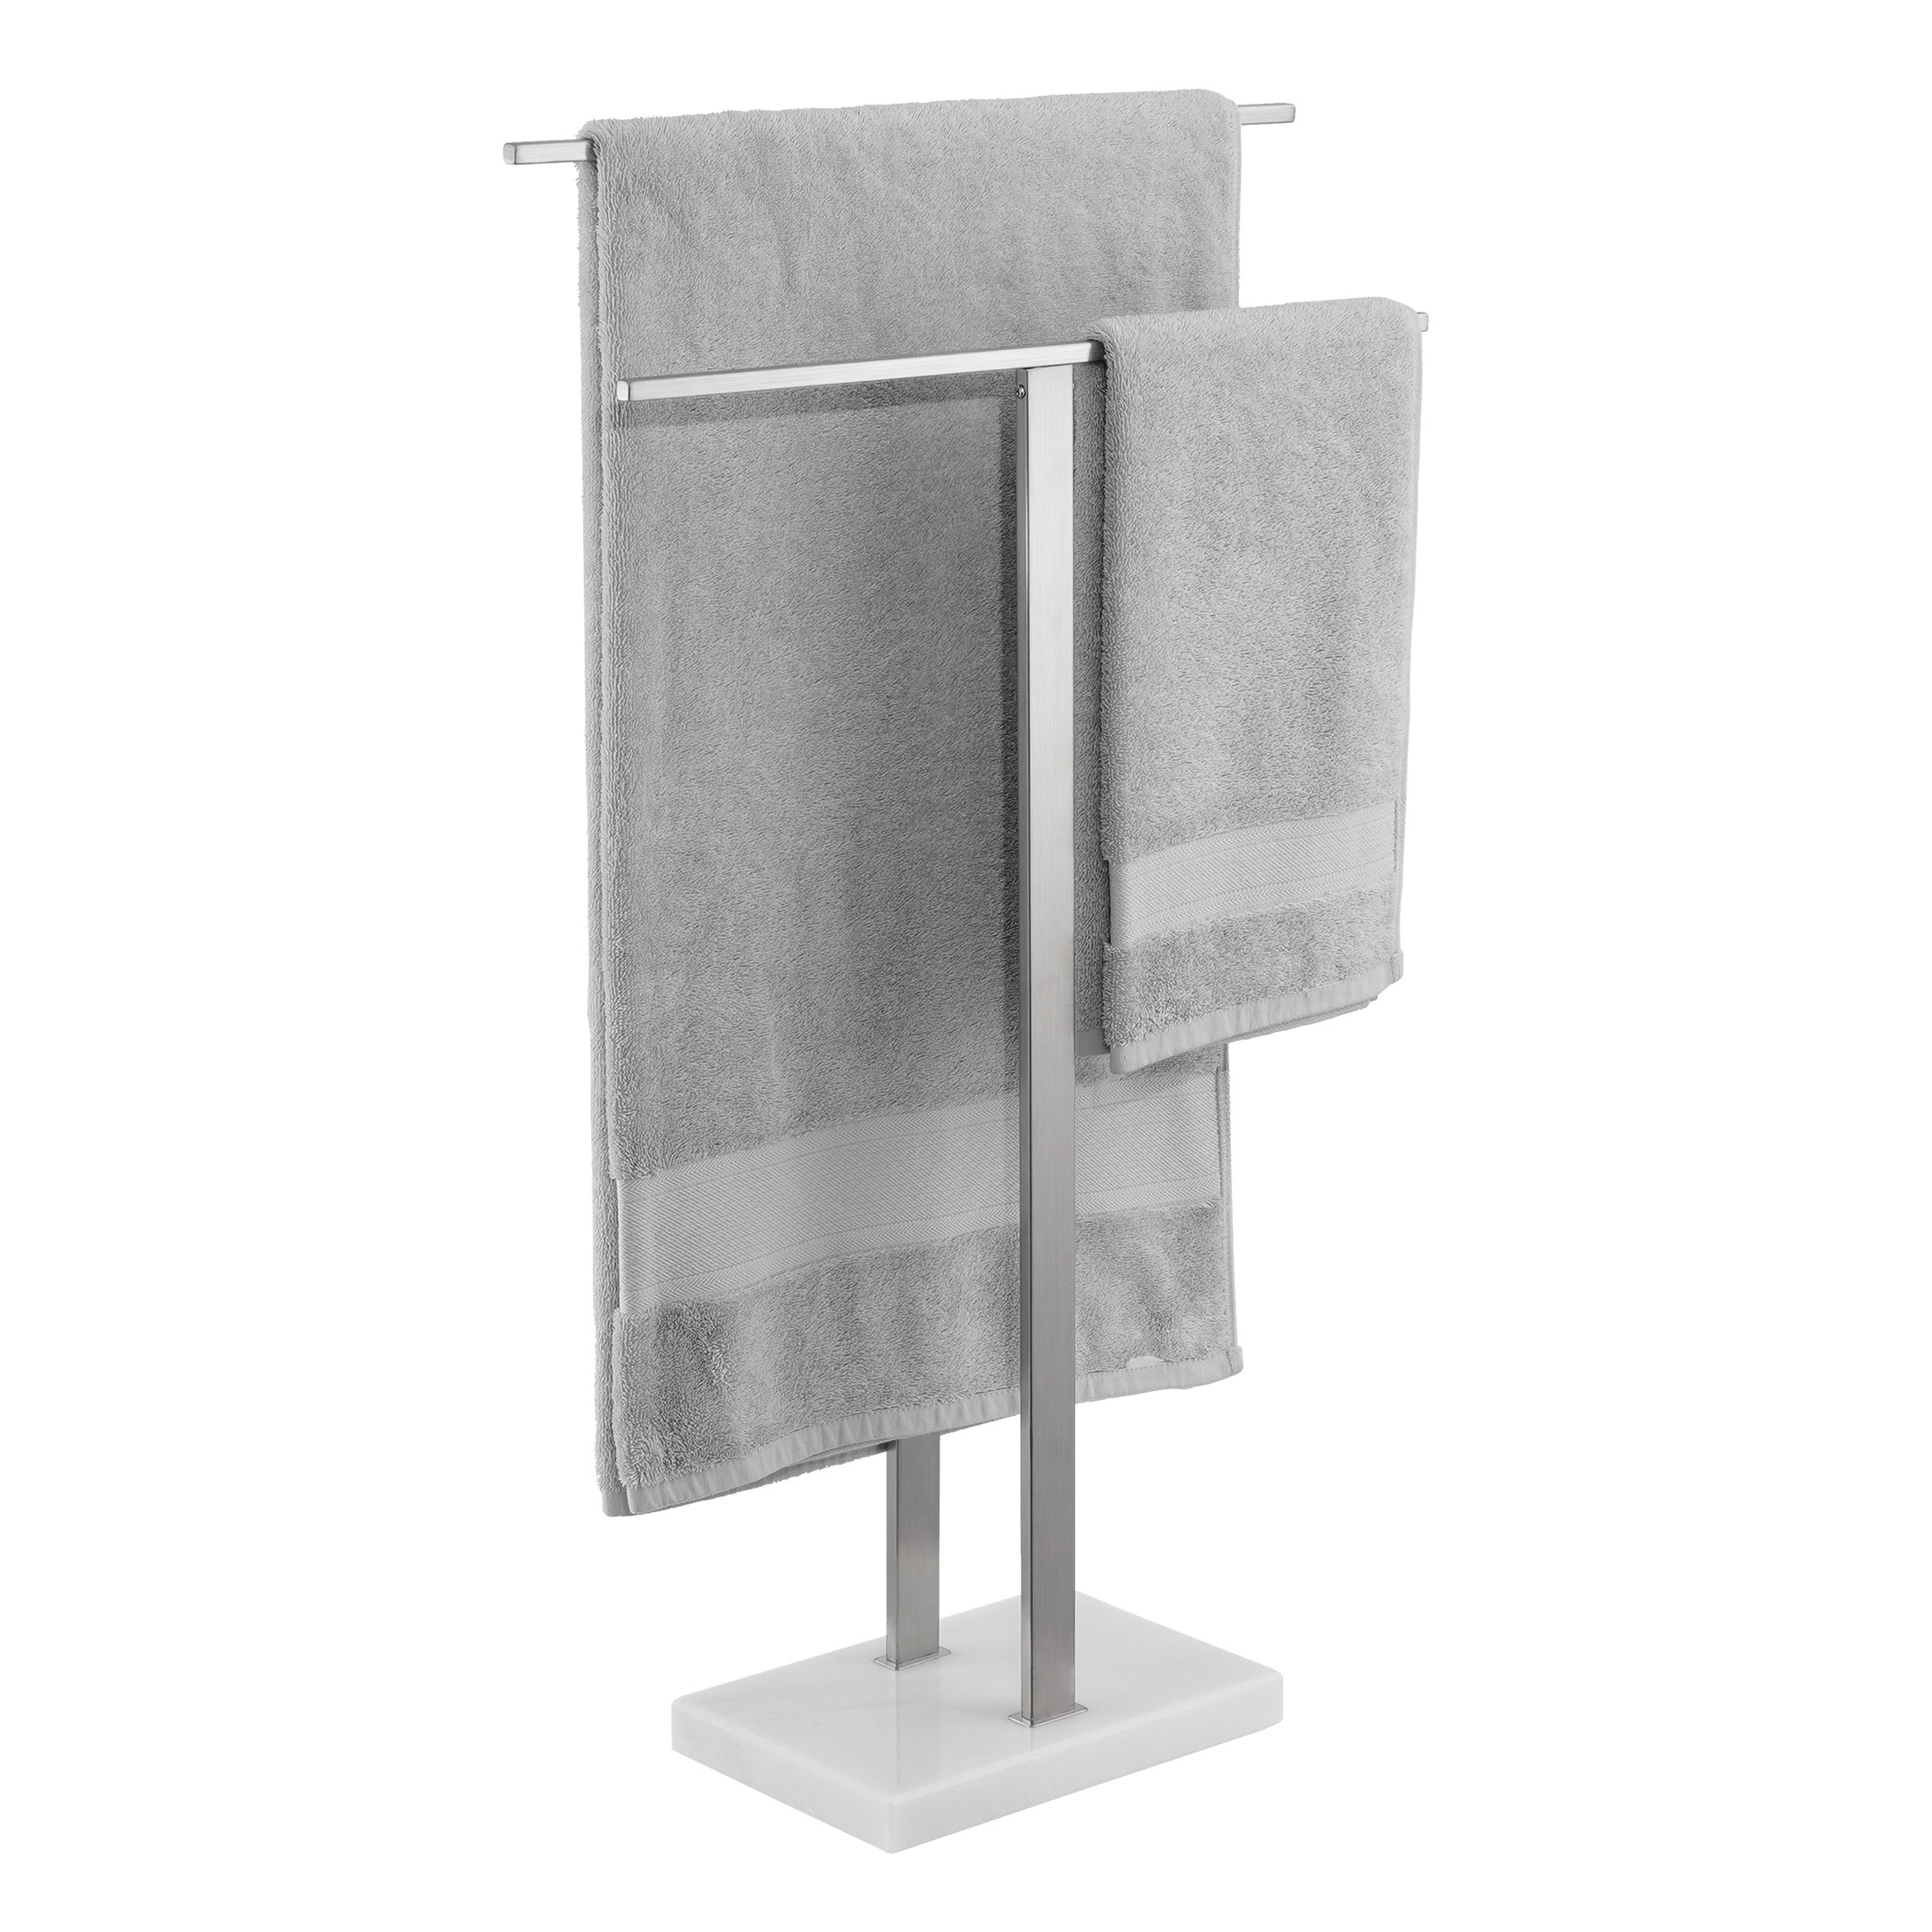 Kes Freestanding Toilet Paper Holder with Reserve for Bathroom Modern Tissue Roll Holder Stand 29 inch H SUS304 Stainless Steel Rustproof Matte Black